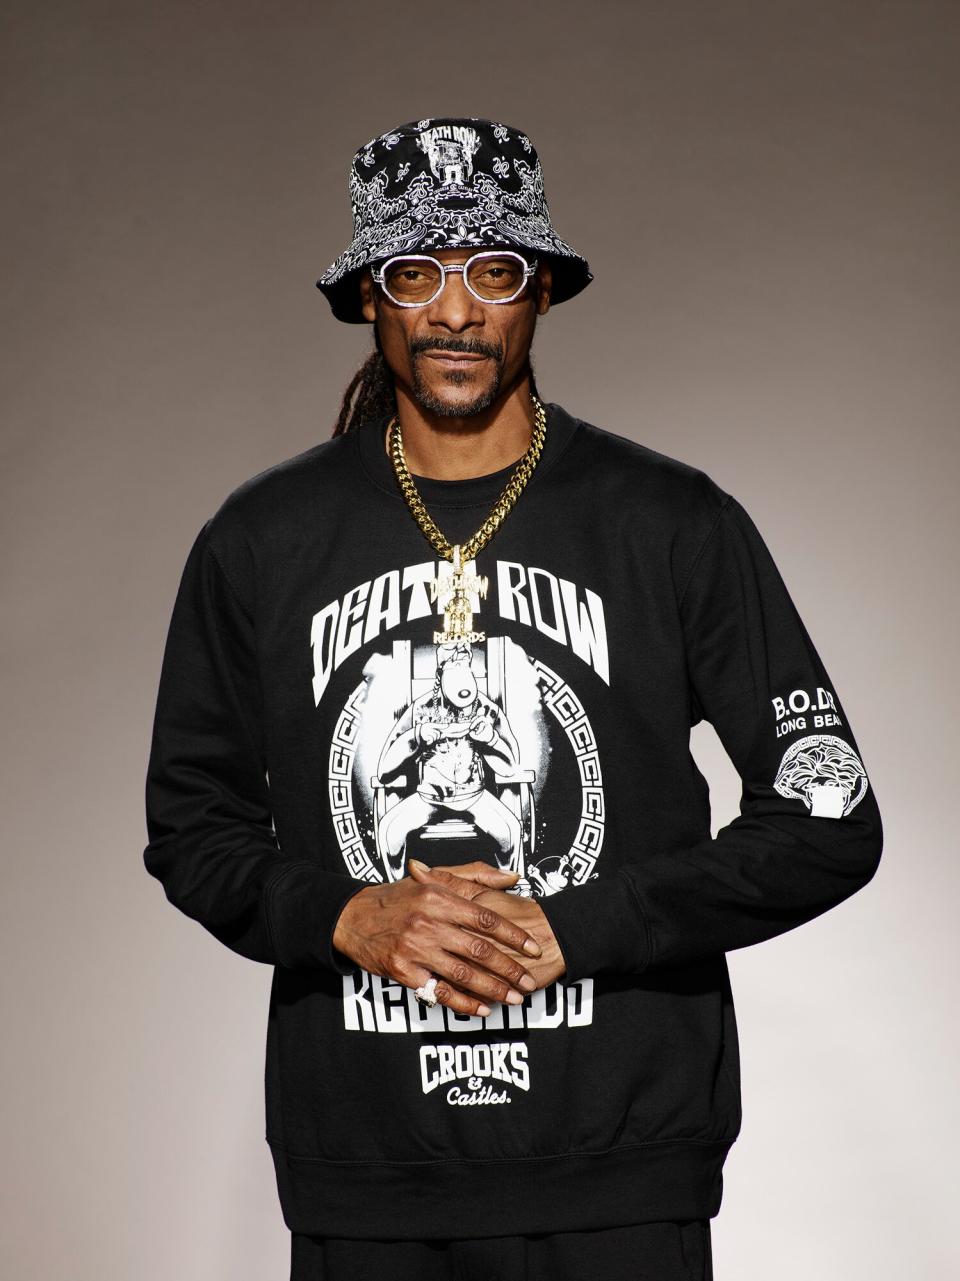 UNIVERSAL PICTURES ANNOUNCES DEFINITIVE SNOOP DOGG BIOPIC